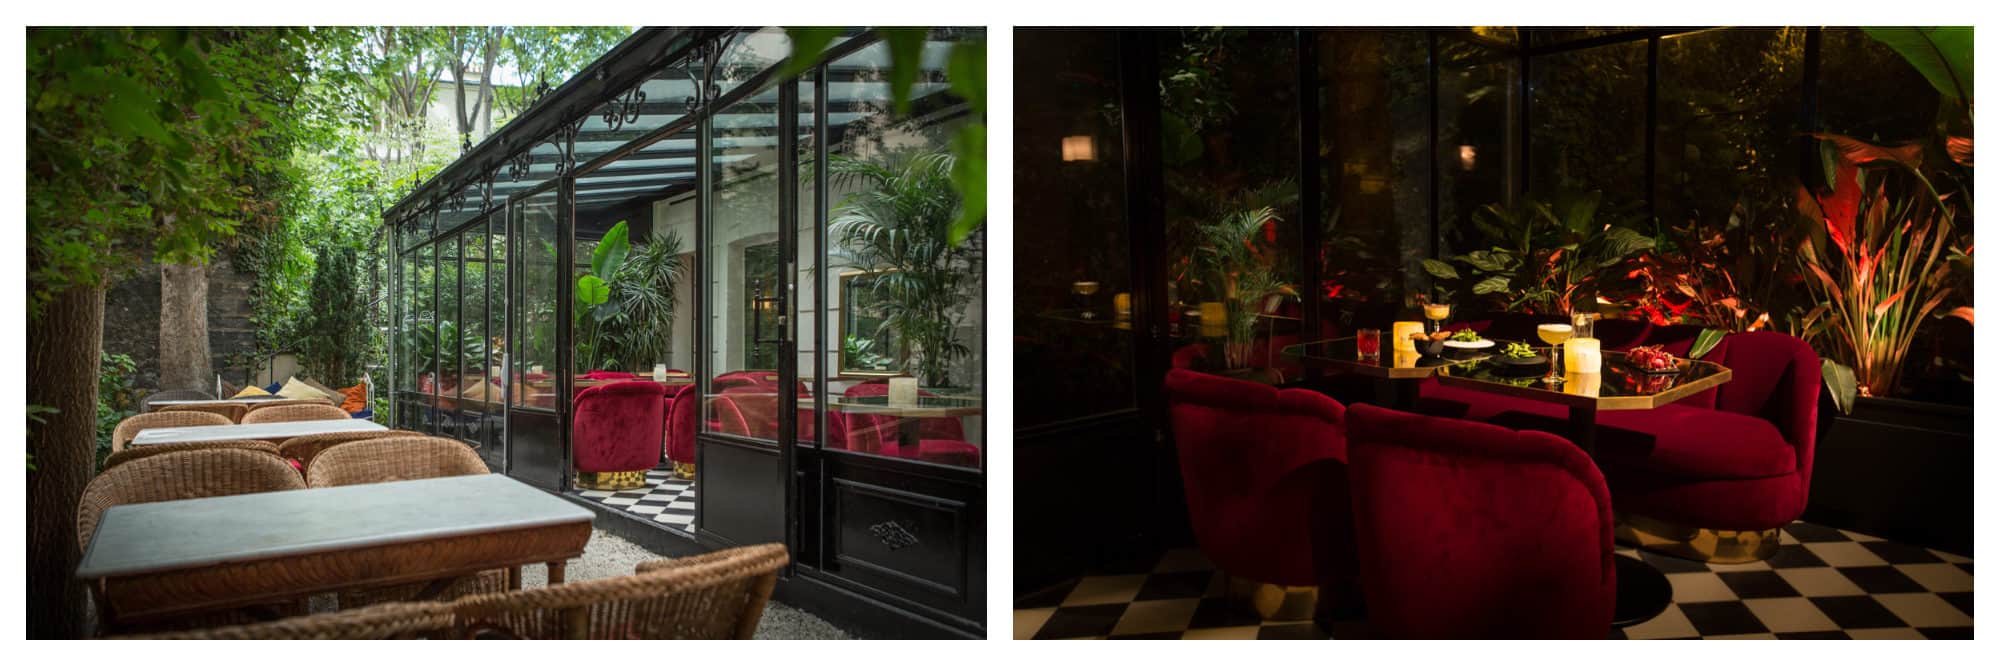 The conservatory at the Très Particulier bar and restaurant in Montmartre in Paris.